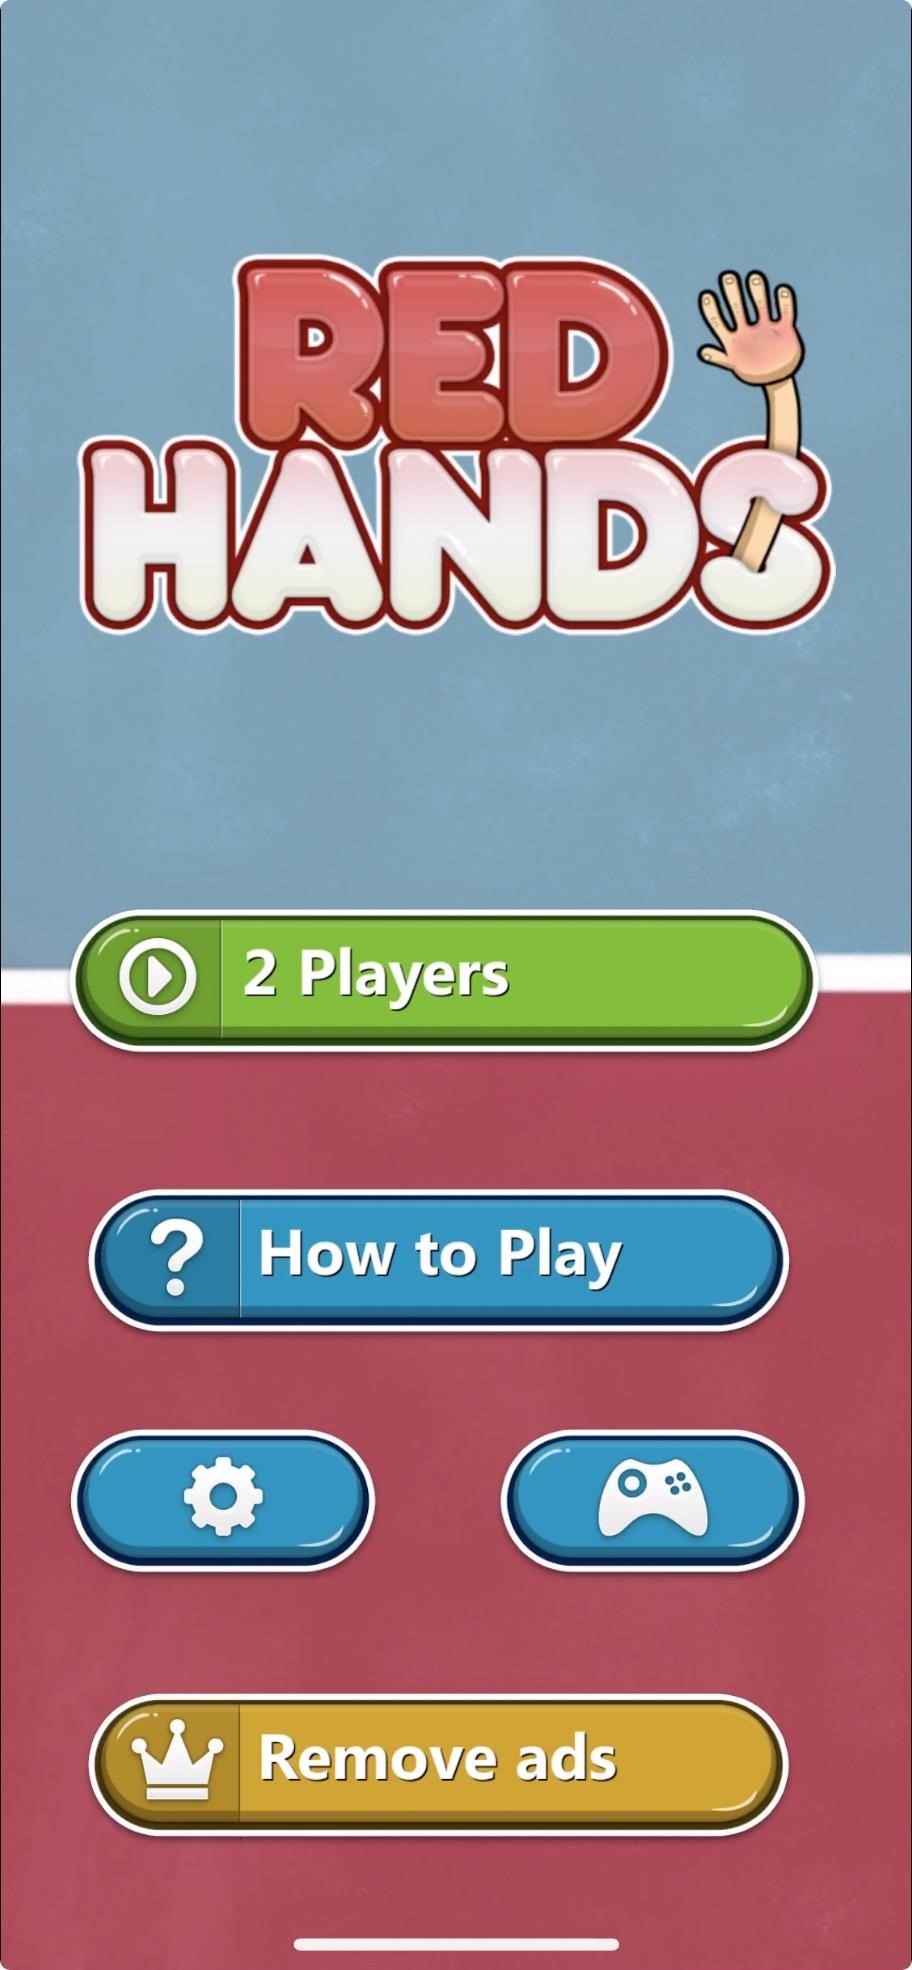 7 Free Pass 'n' Play Games for Your Phone That Make Coronavirus Bearable at Home